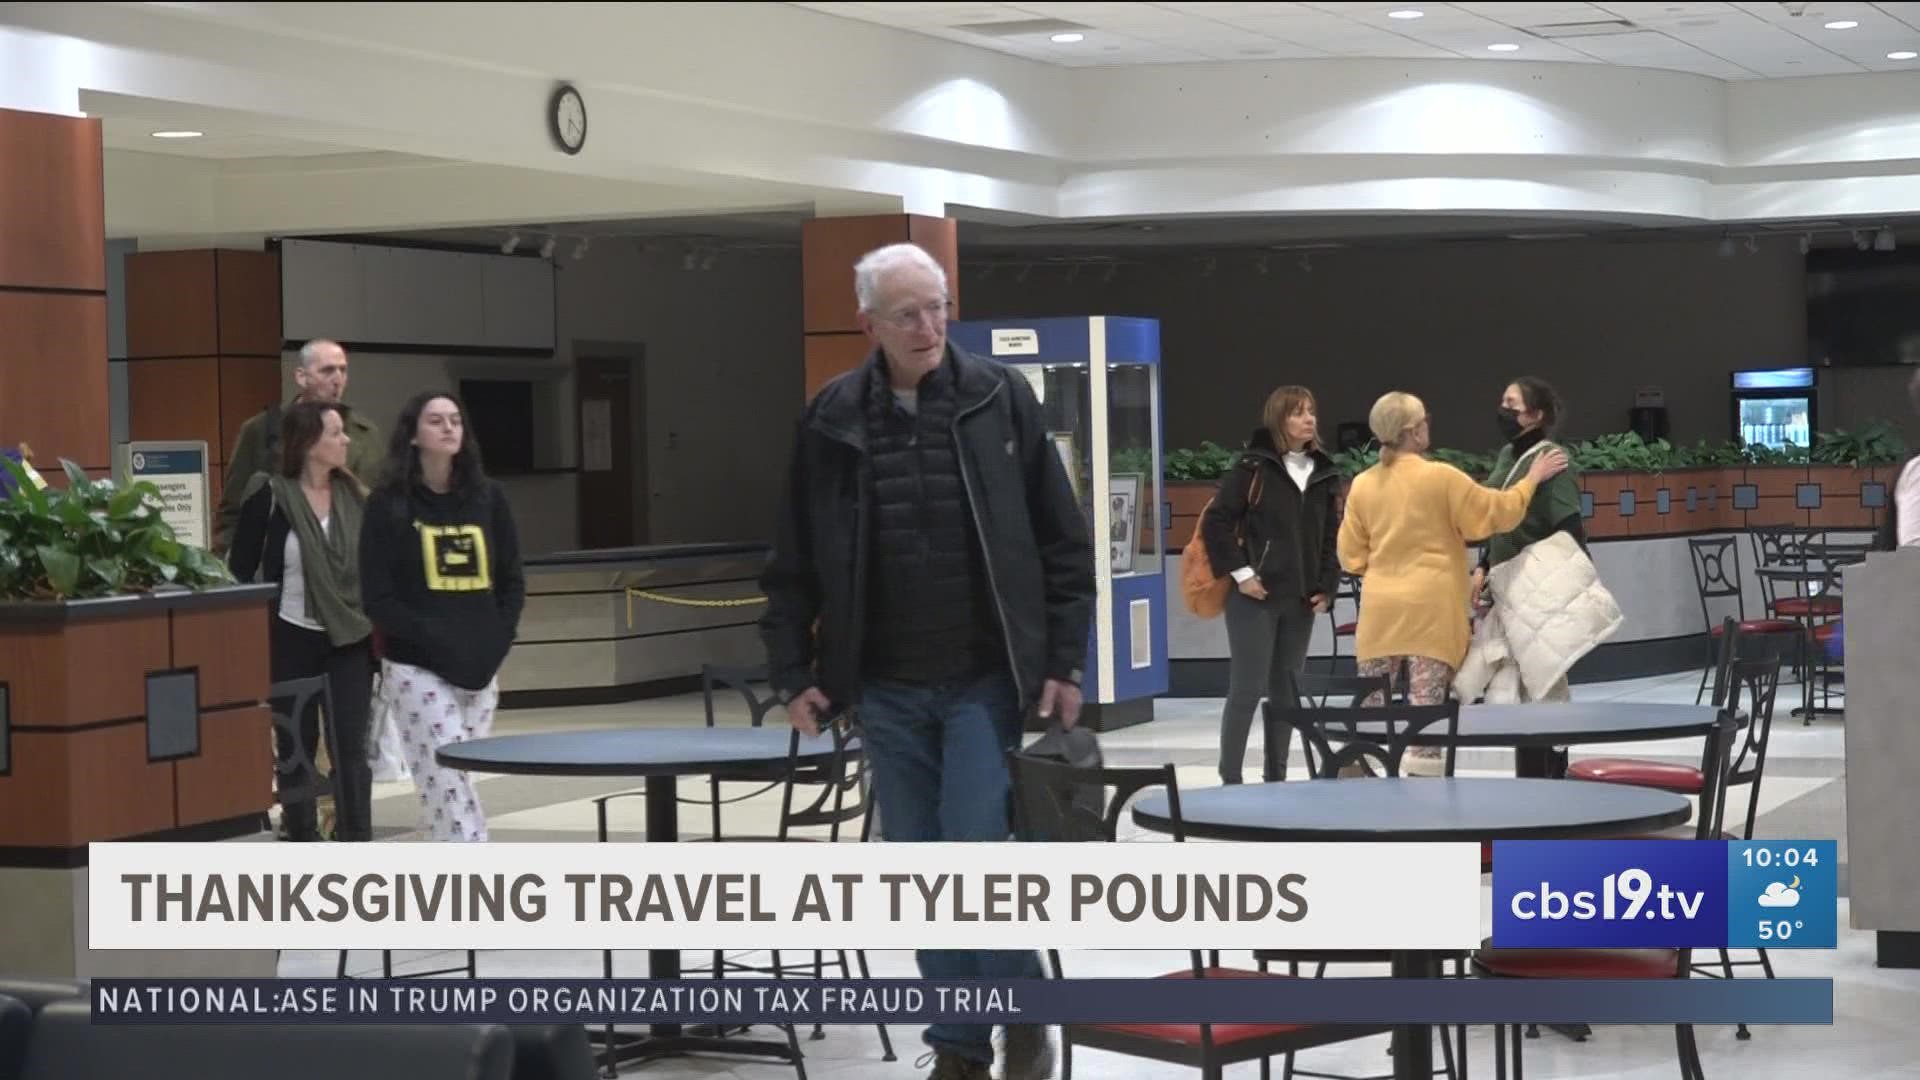 Preparing for Thanksgiving travel at Tyler Pounds Airport